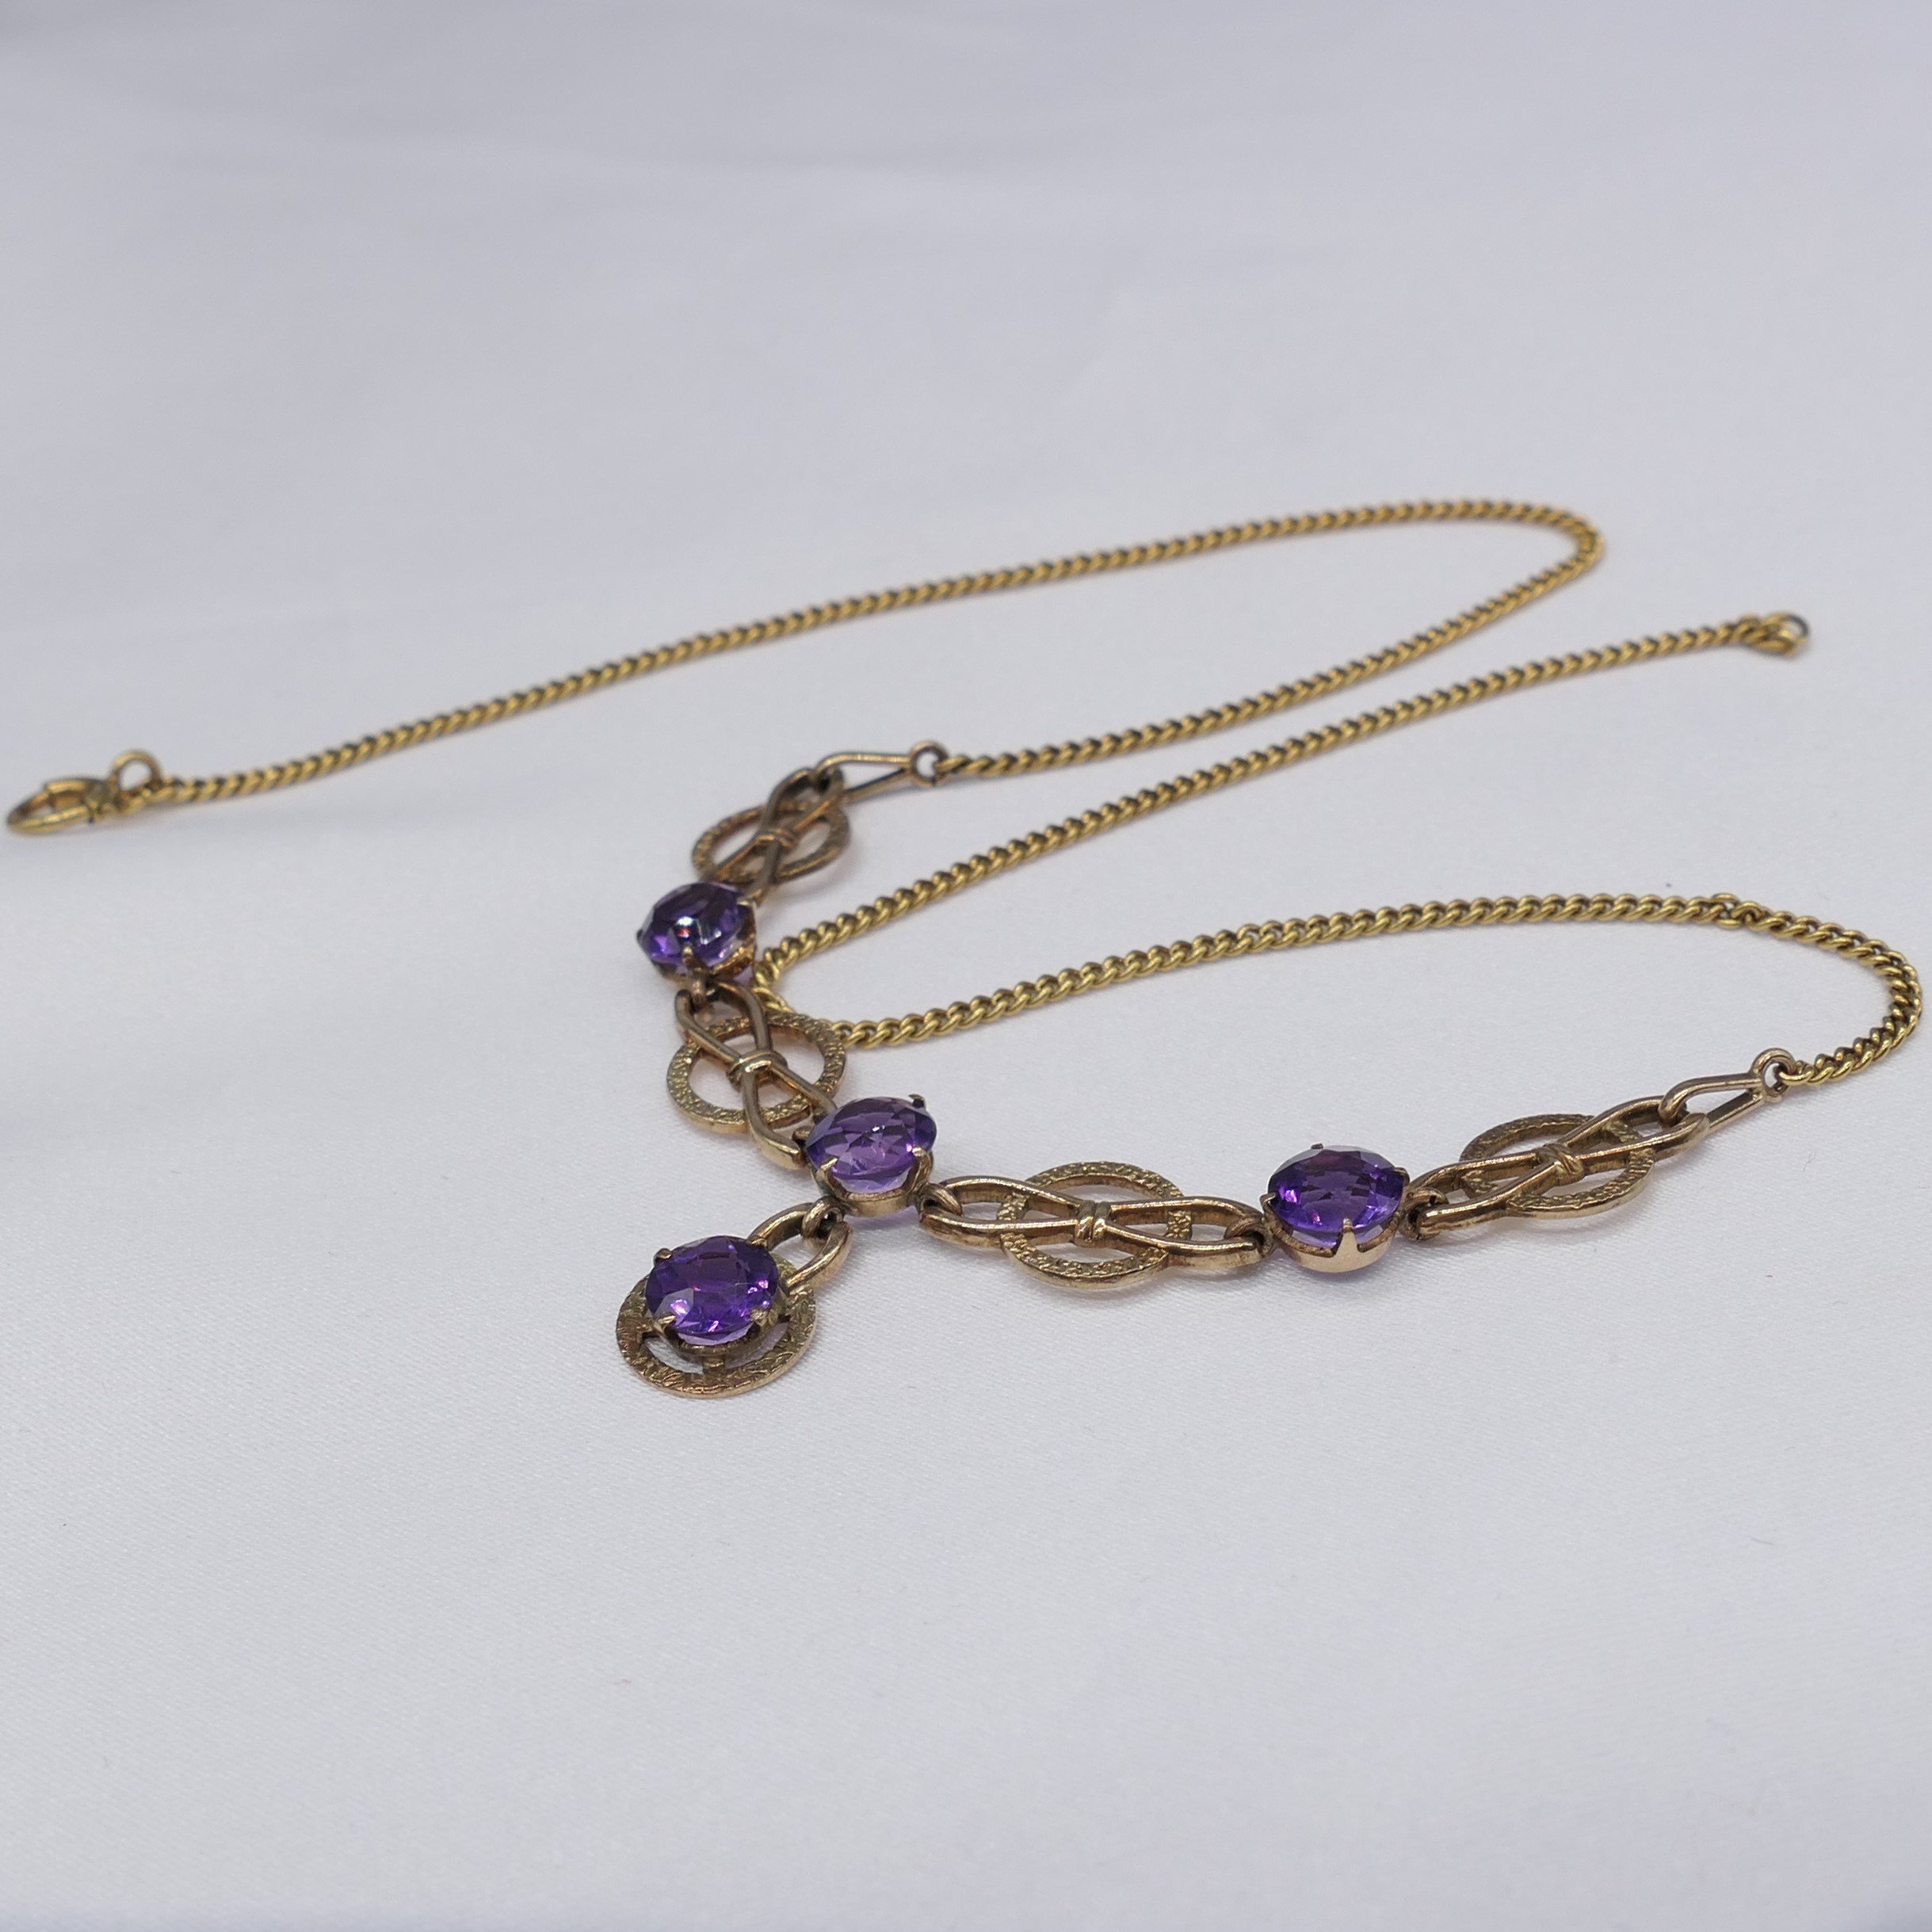 Ornate vintage 9ct yellow gold necklace set with round-cut purple amethysts - Image 4 of 9